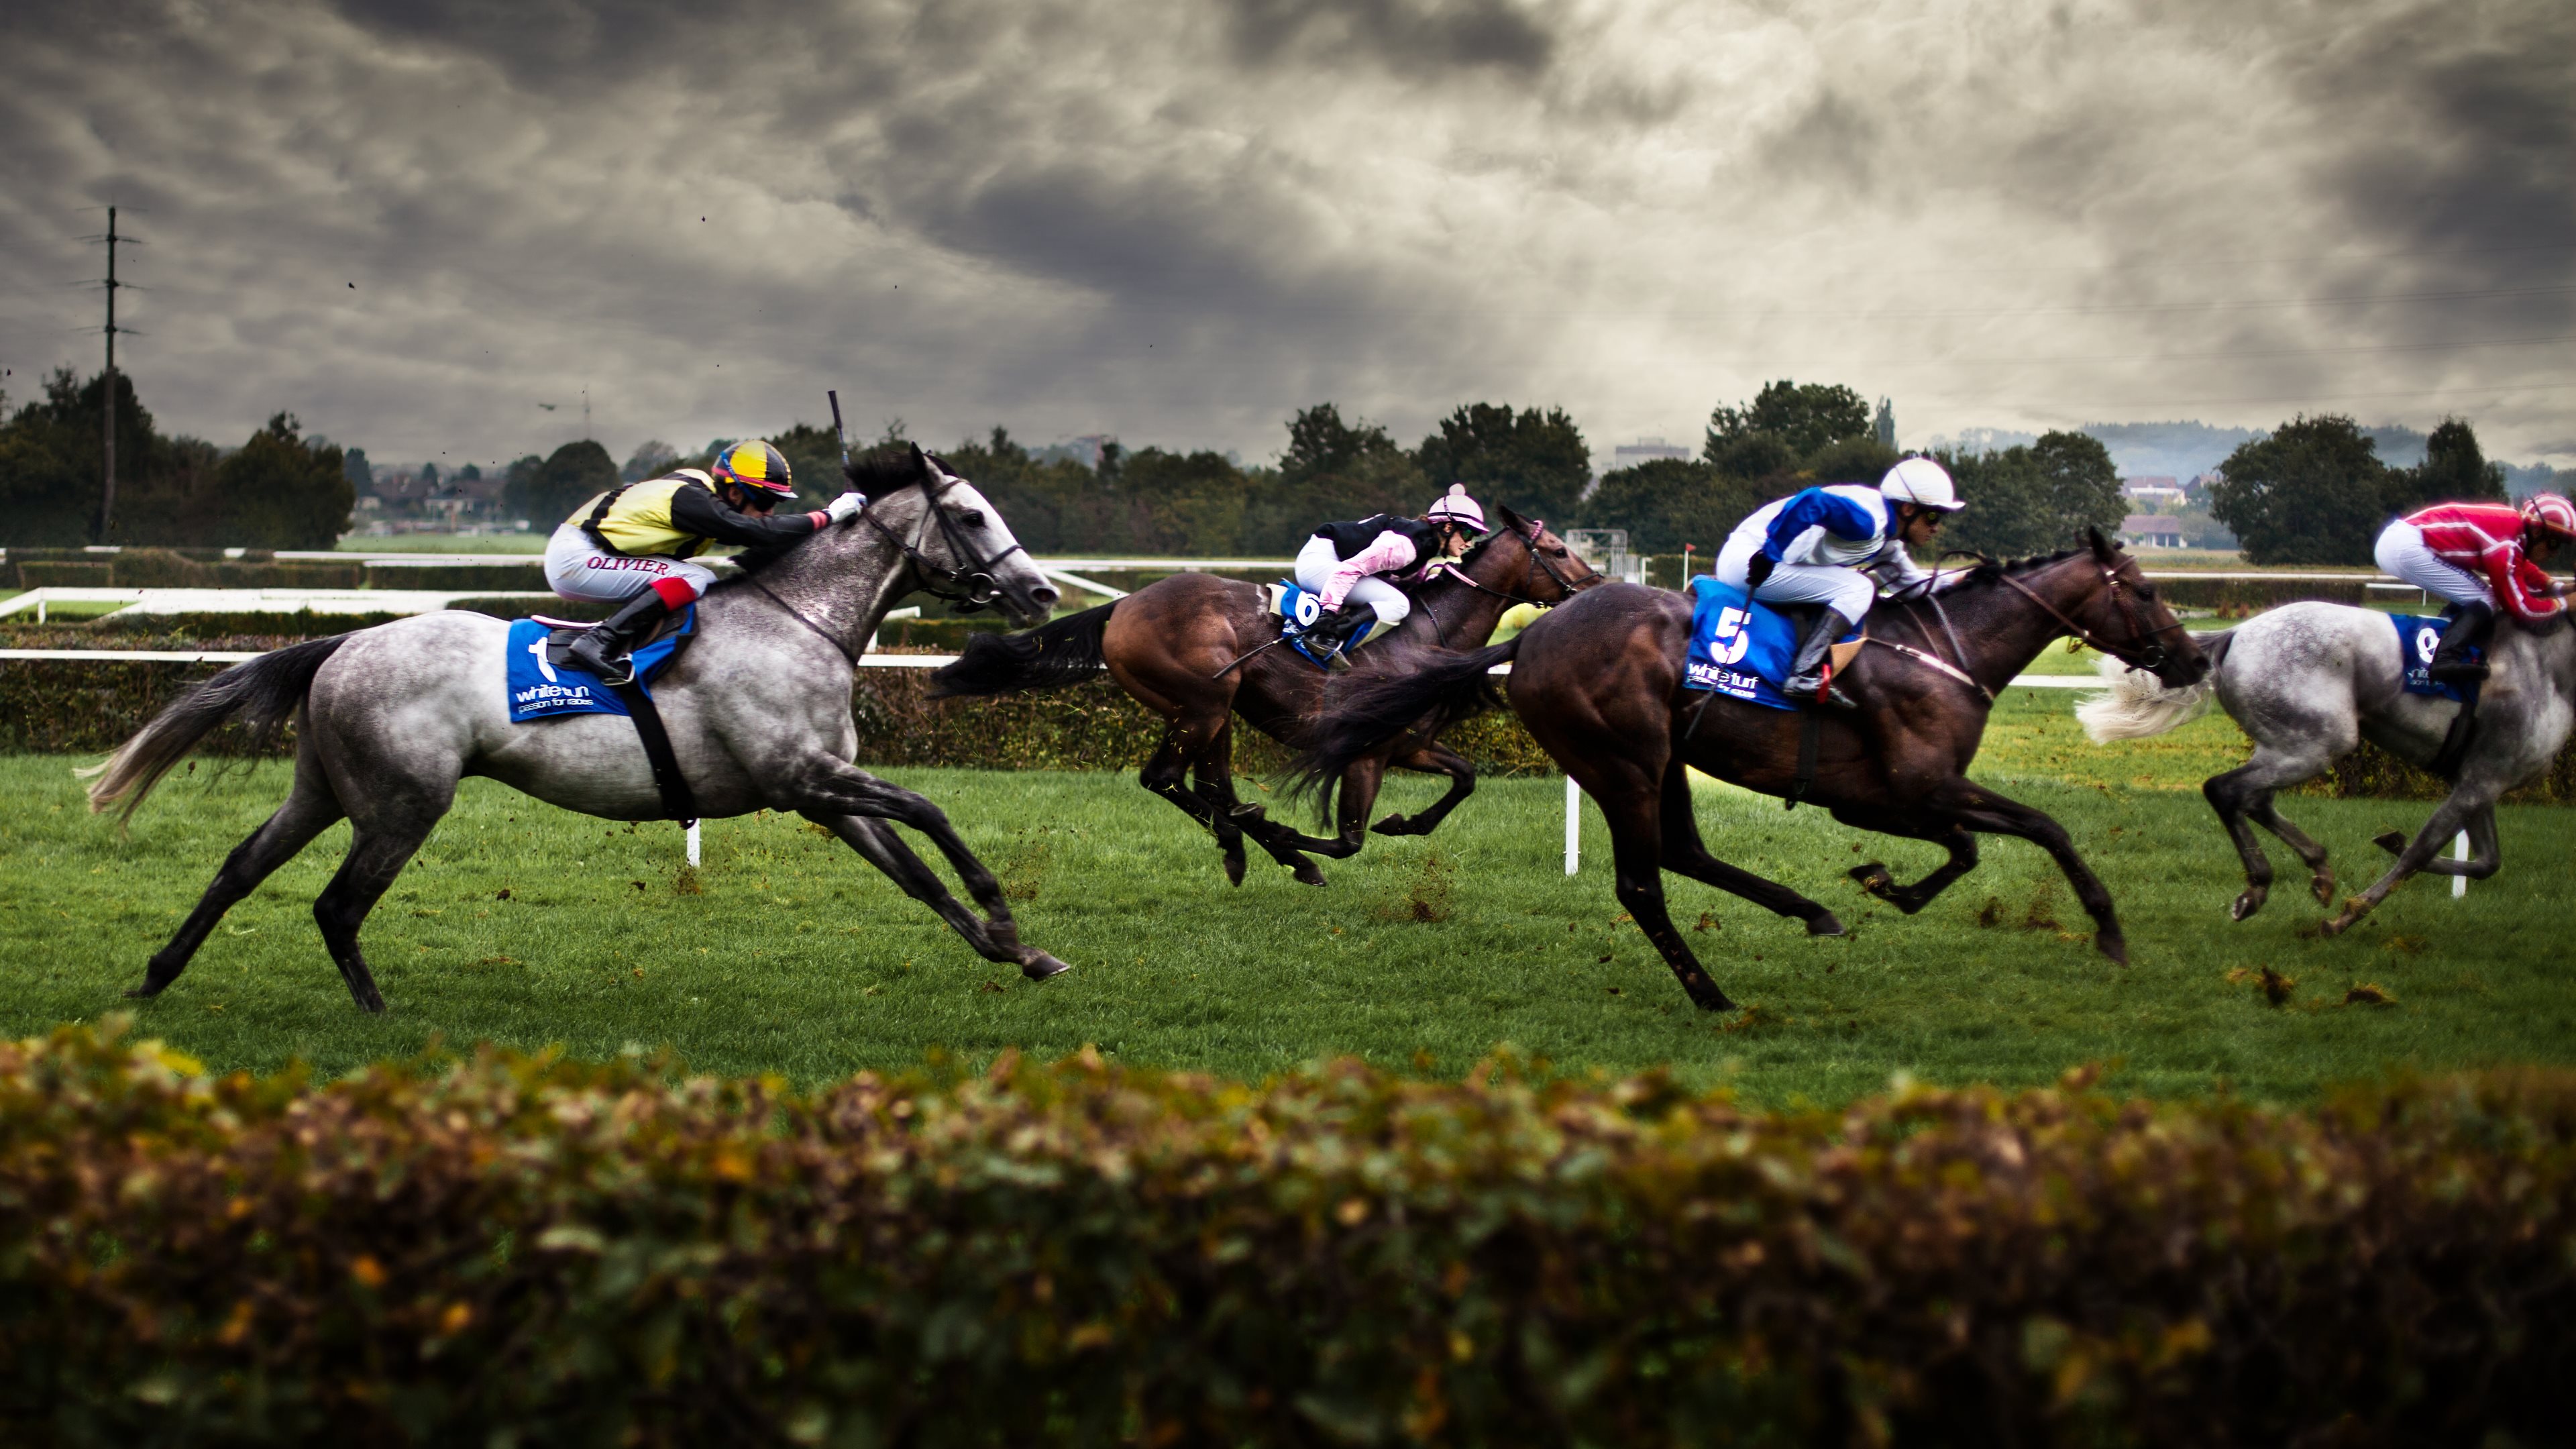 30+ Horse Racing HD Wallpapers and Backgrounds